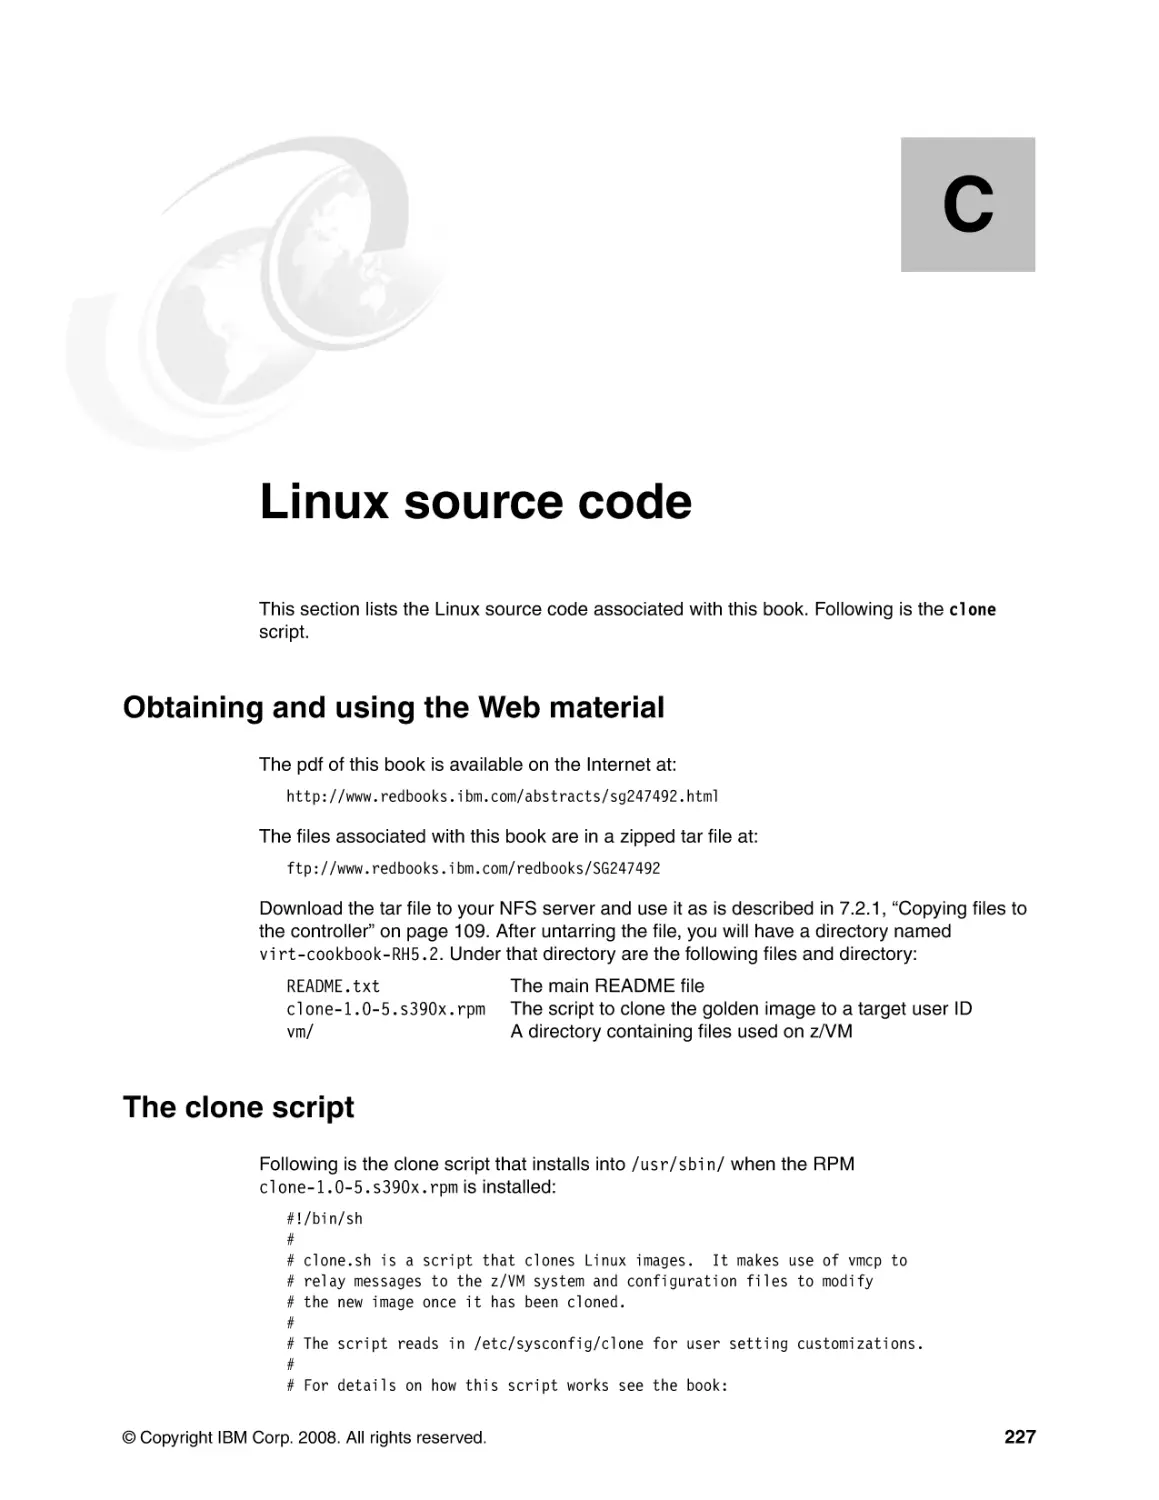 Appendix C. Linux source code
Obtaining and using the Web material
The clone script